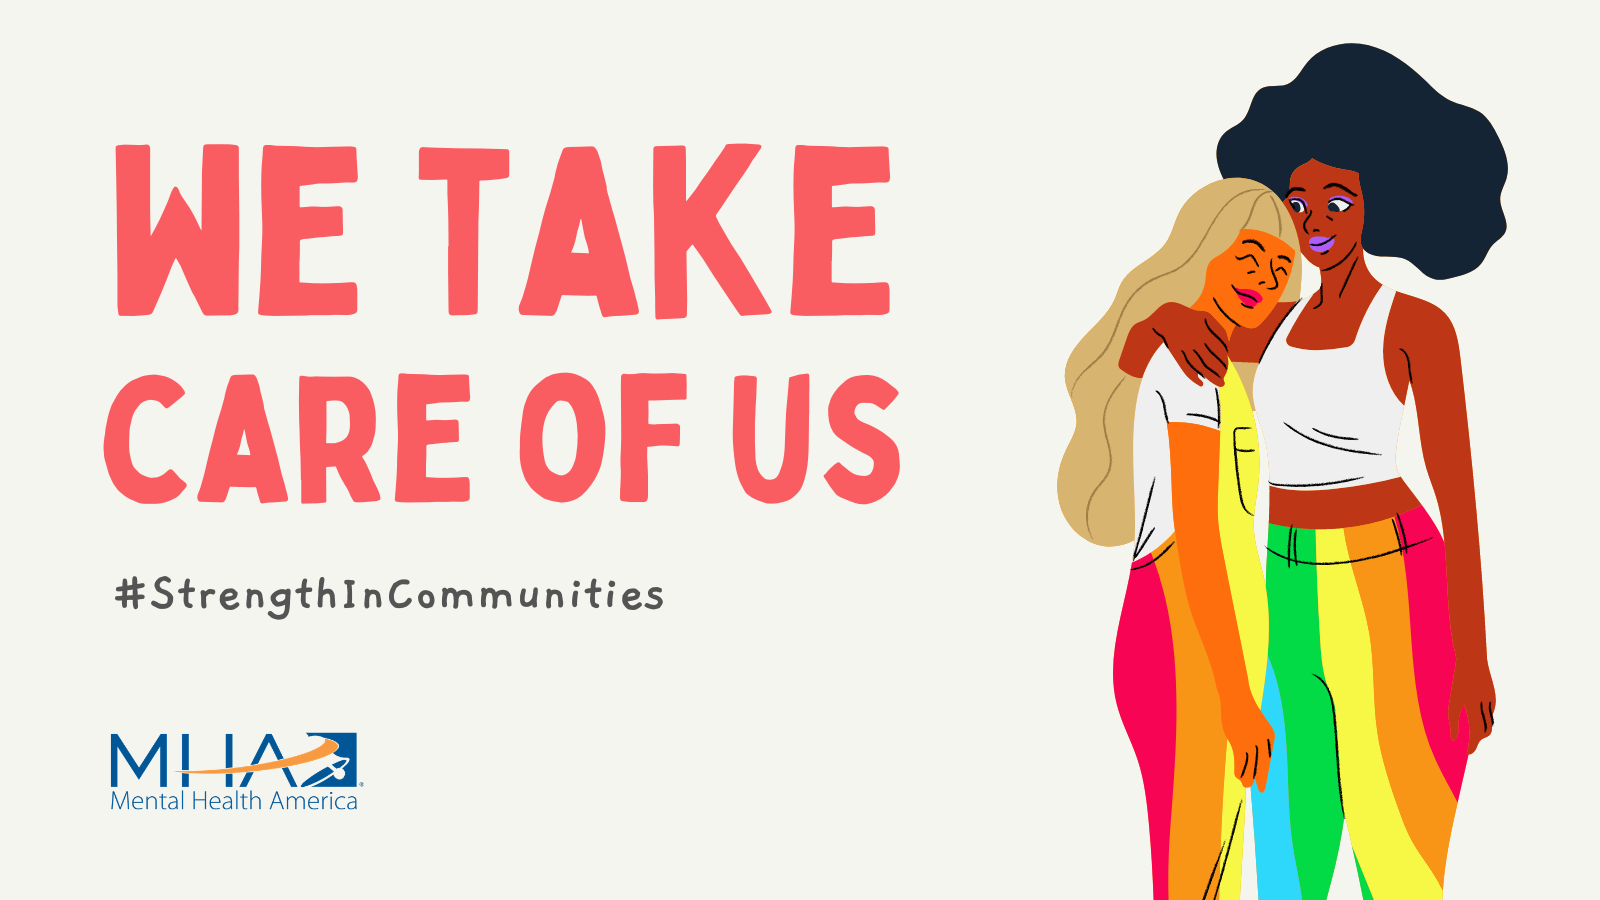 We Take Care of Us #StrengthInCommunities with two cartoon images of femme presenting BIPOC individuals hugging